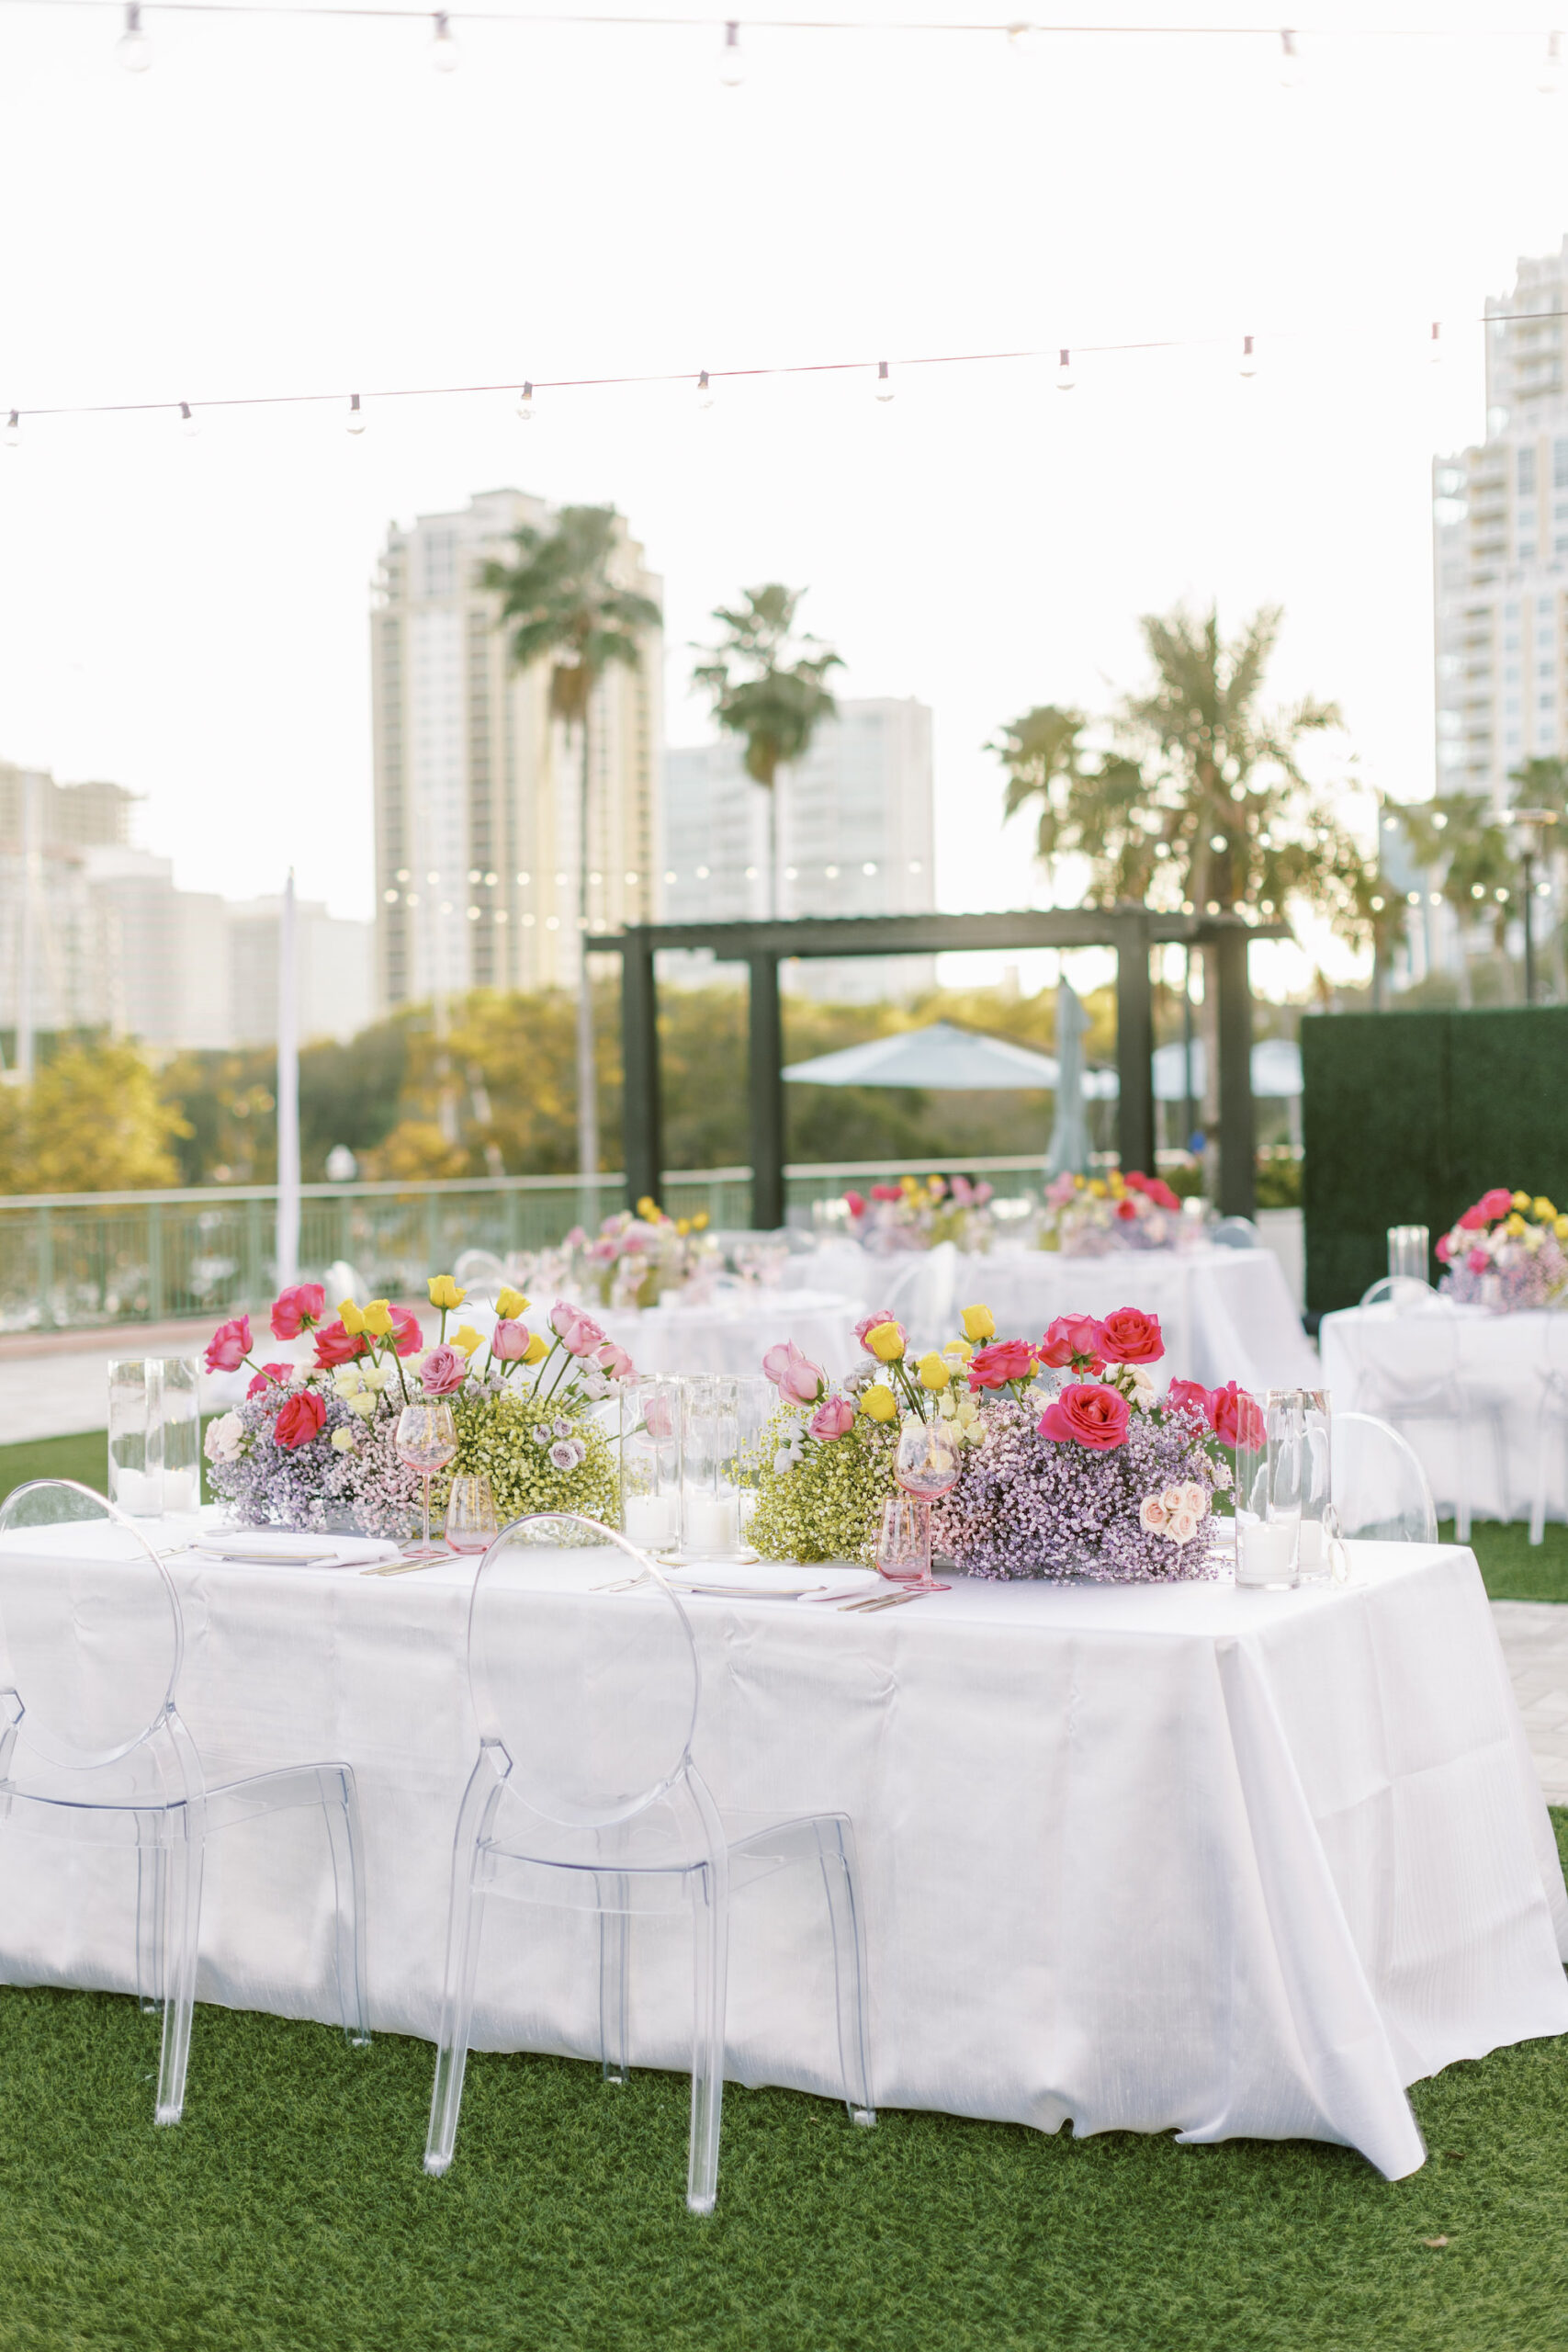 Romantic Spring Whimsical Reception Tablescape Ideas with Ombre Red and Purple Centerpieces and Ghost Chairs | Tampa Bay Florist Bruce Wayne Florals | Rentals Gabro Rental Services | Venue The Vinoy | Planners Parties a la Carte